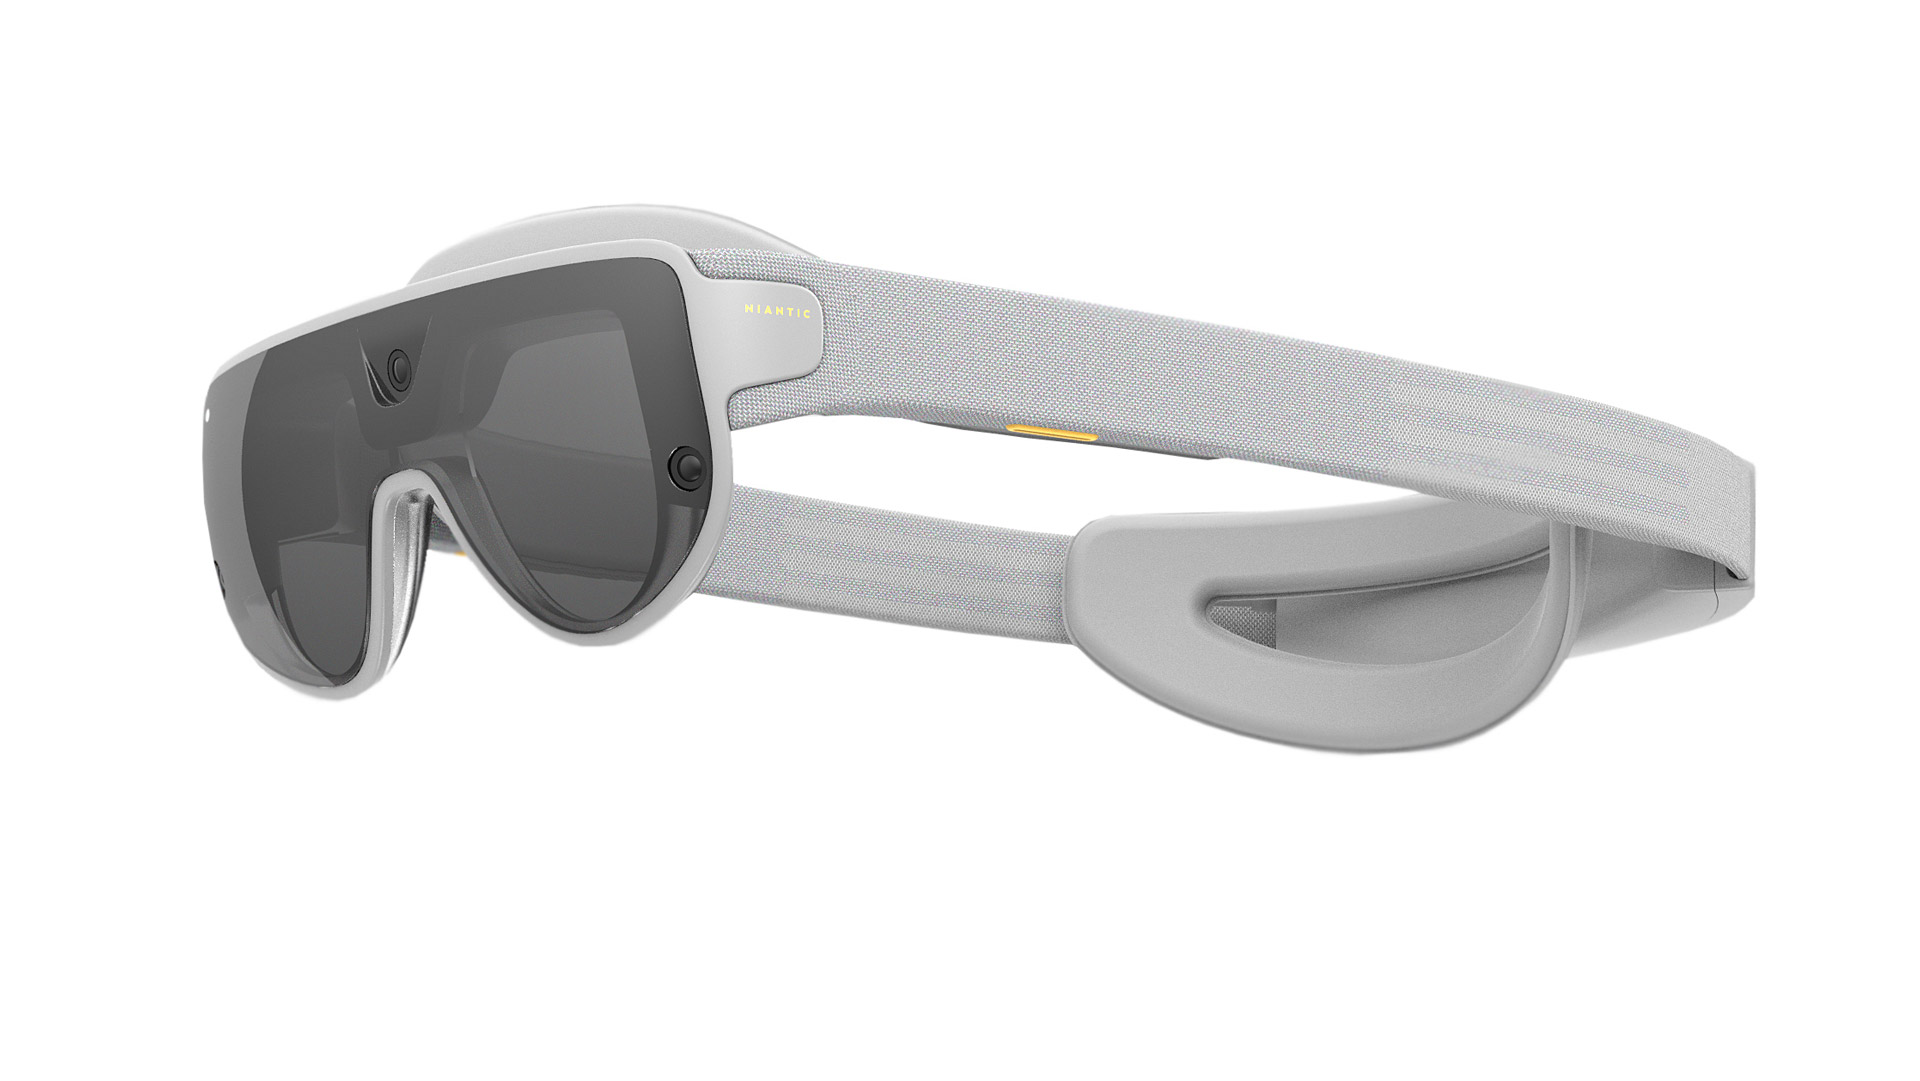 Niantic Reveals Snapdragon AR2-powered Headset for Outdoor Use